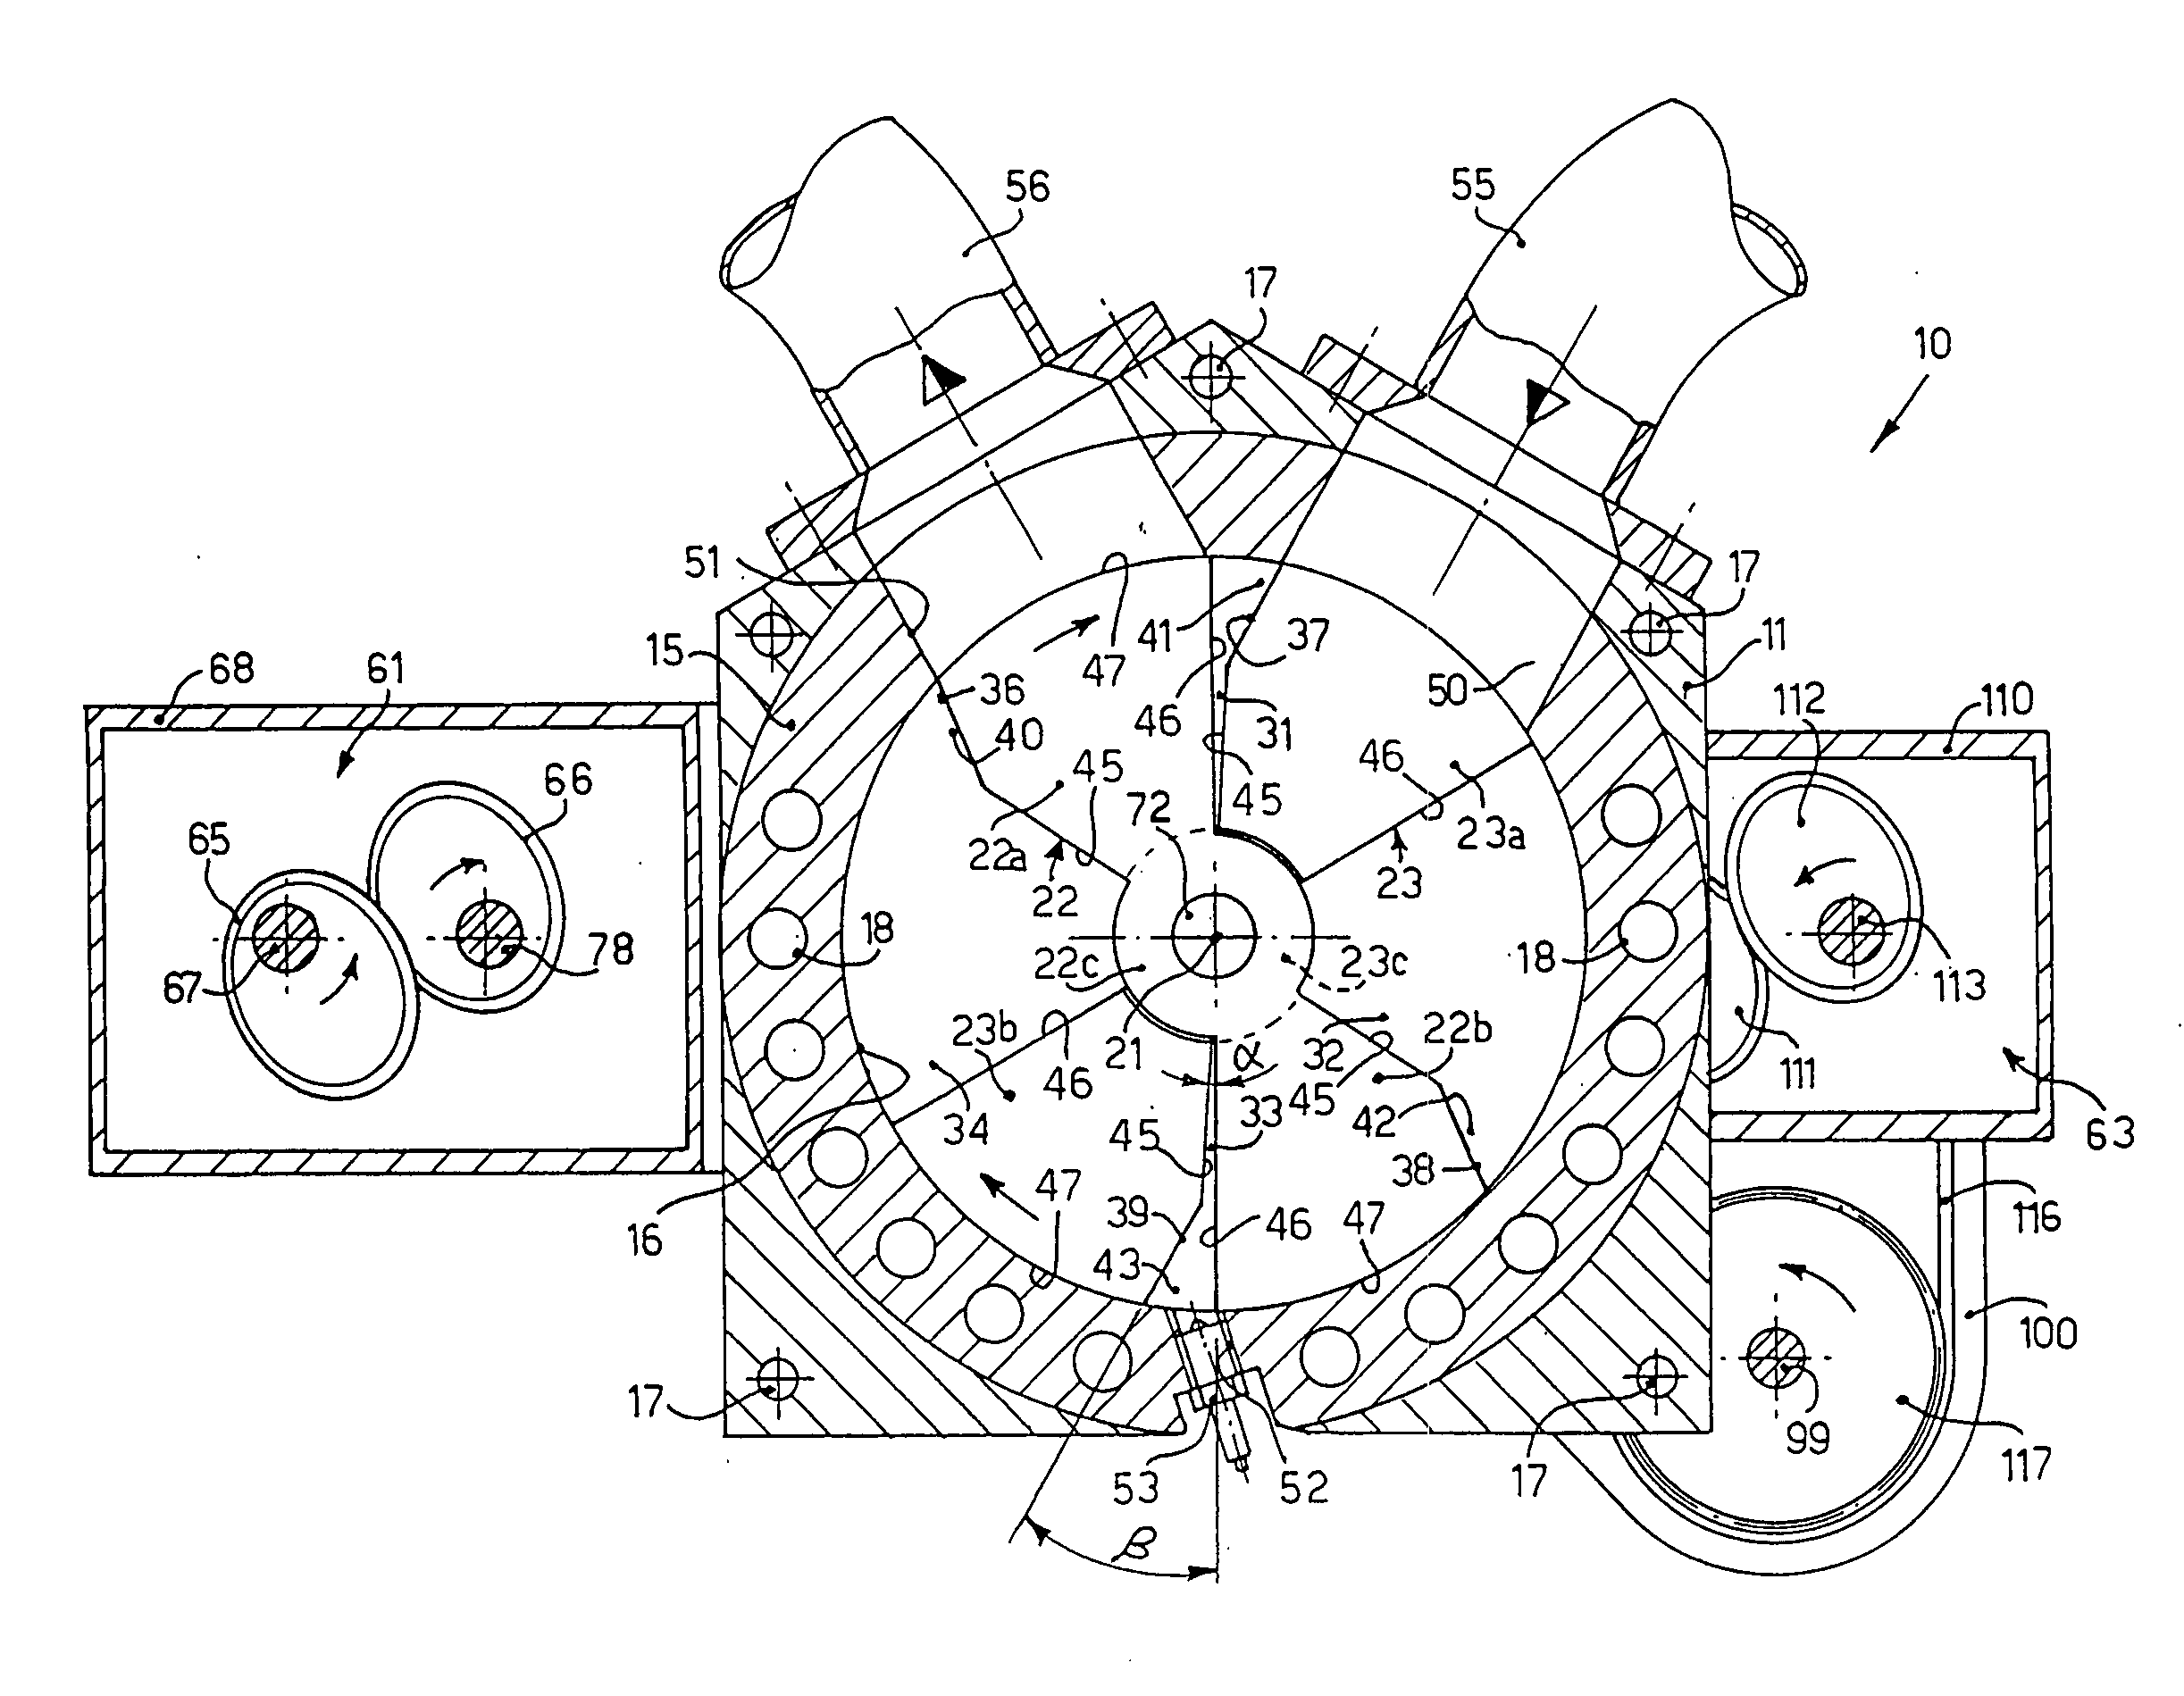 Rotary piston combustion engine